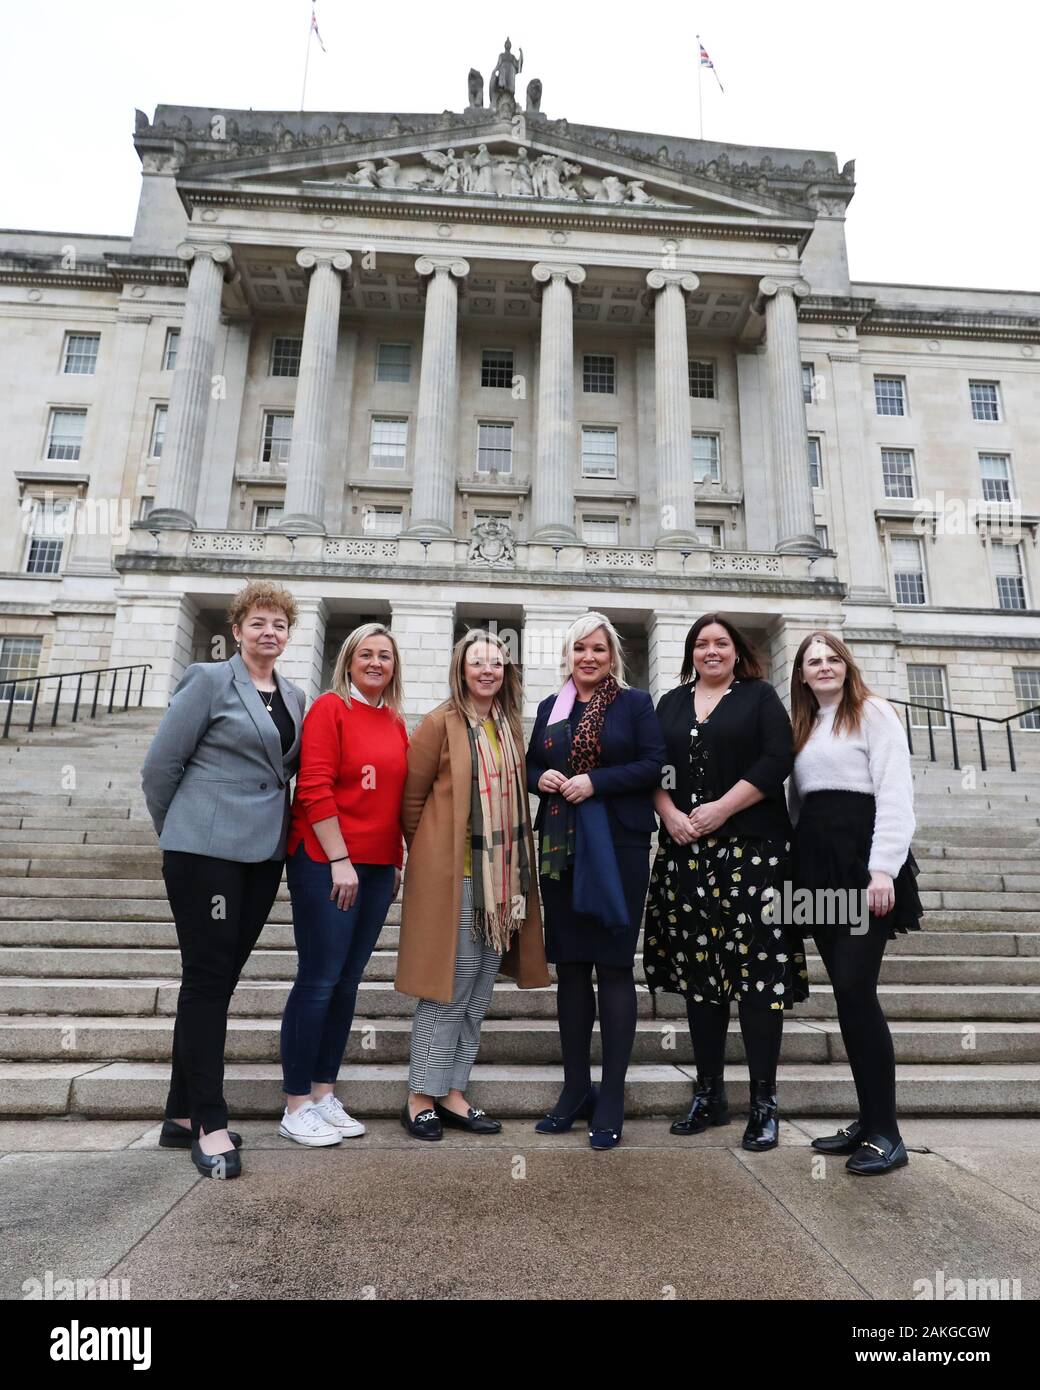 Sinn Fein's Caral Ni Chuilin (far left), Sinad Ennis (second left), deputy leader Michelle O'Neill and Caoimhe Archibald (far right) alongside the party's two new co-opted Members of the Legislative Assembly (MLA) Liz Kimmins (third from left) and Deirdre Hargey (second Right) outside the Stormont Parliament buildings in Belfast, as the deadline approaches for the resumption of a power sharing assembly in Northern Ireland. Stock Photo